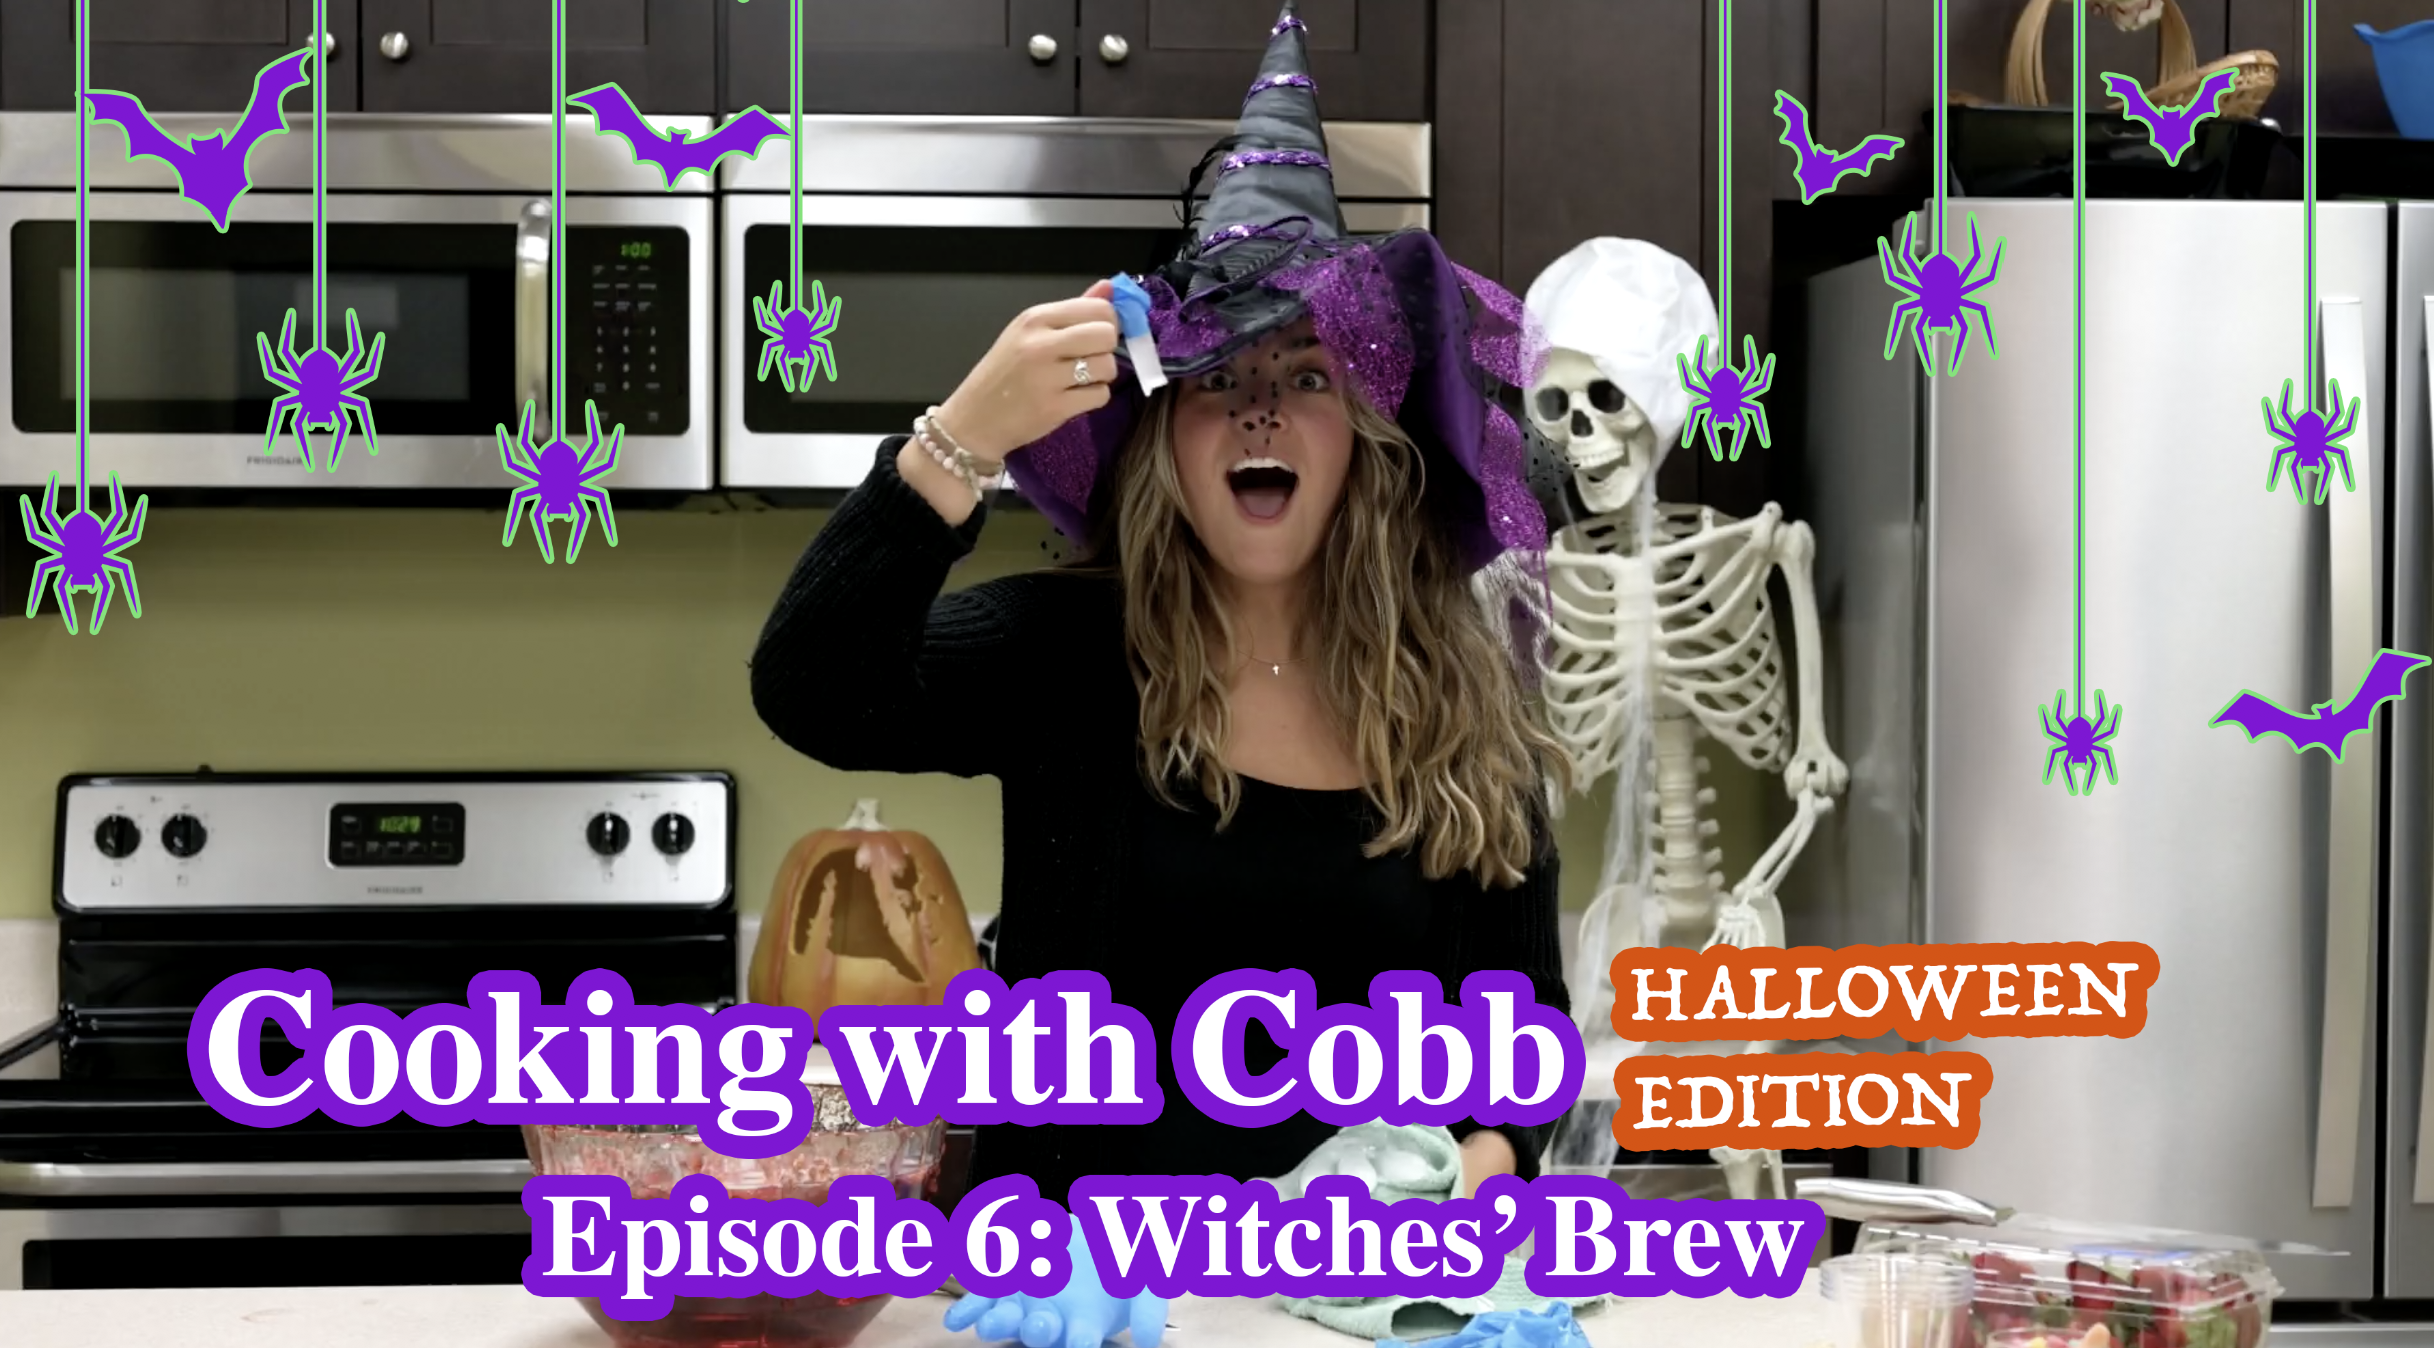 Cooking With Cobb Halloween Edition - Witches' Brew